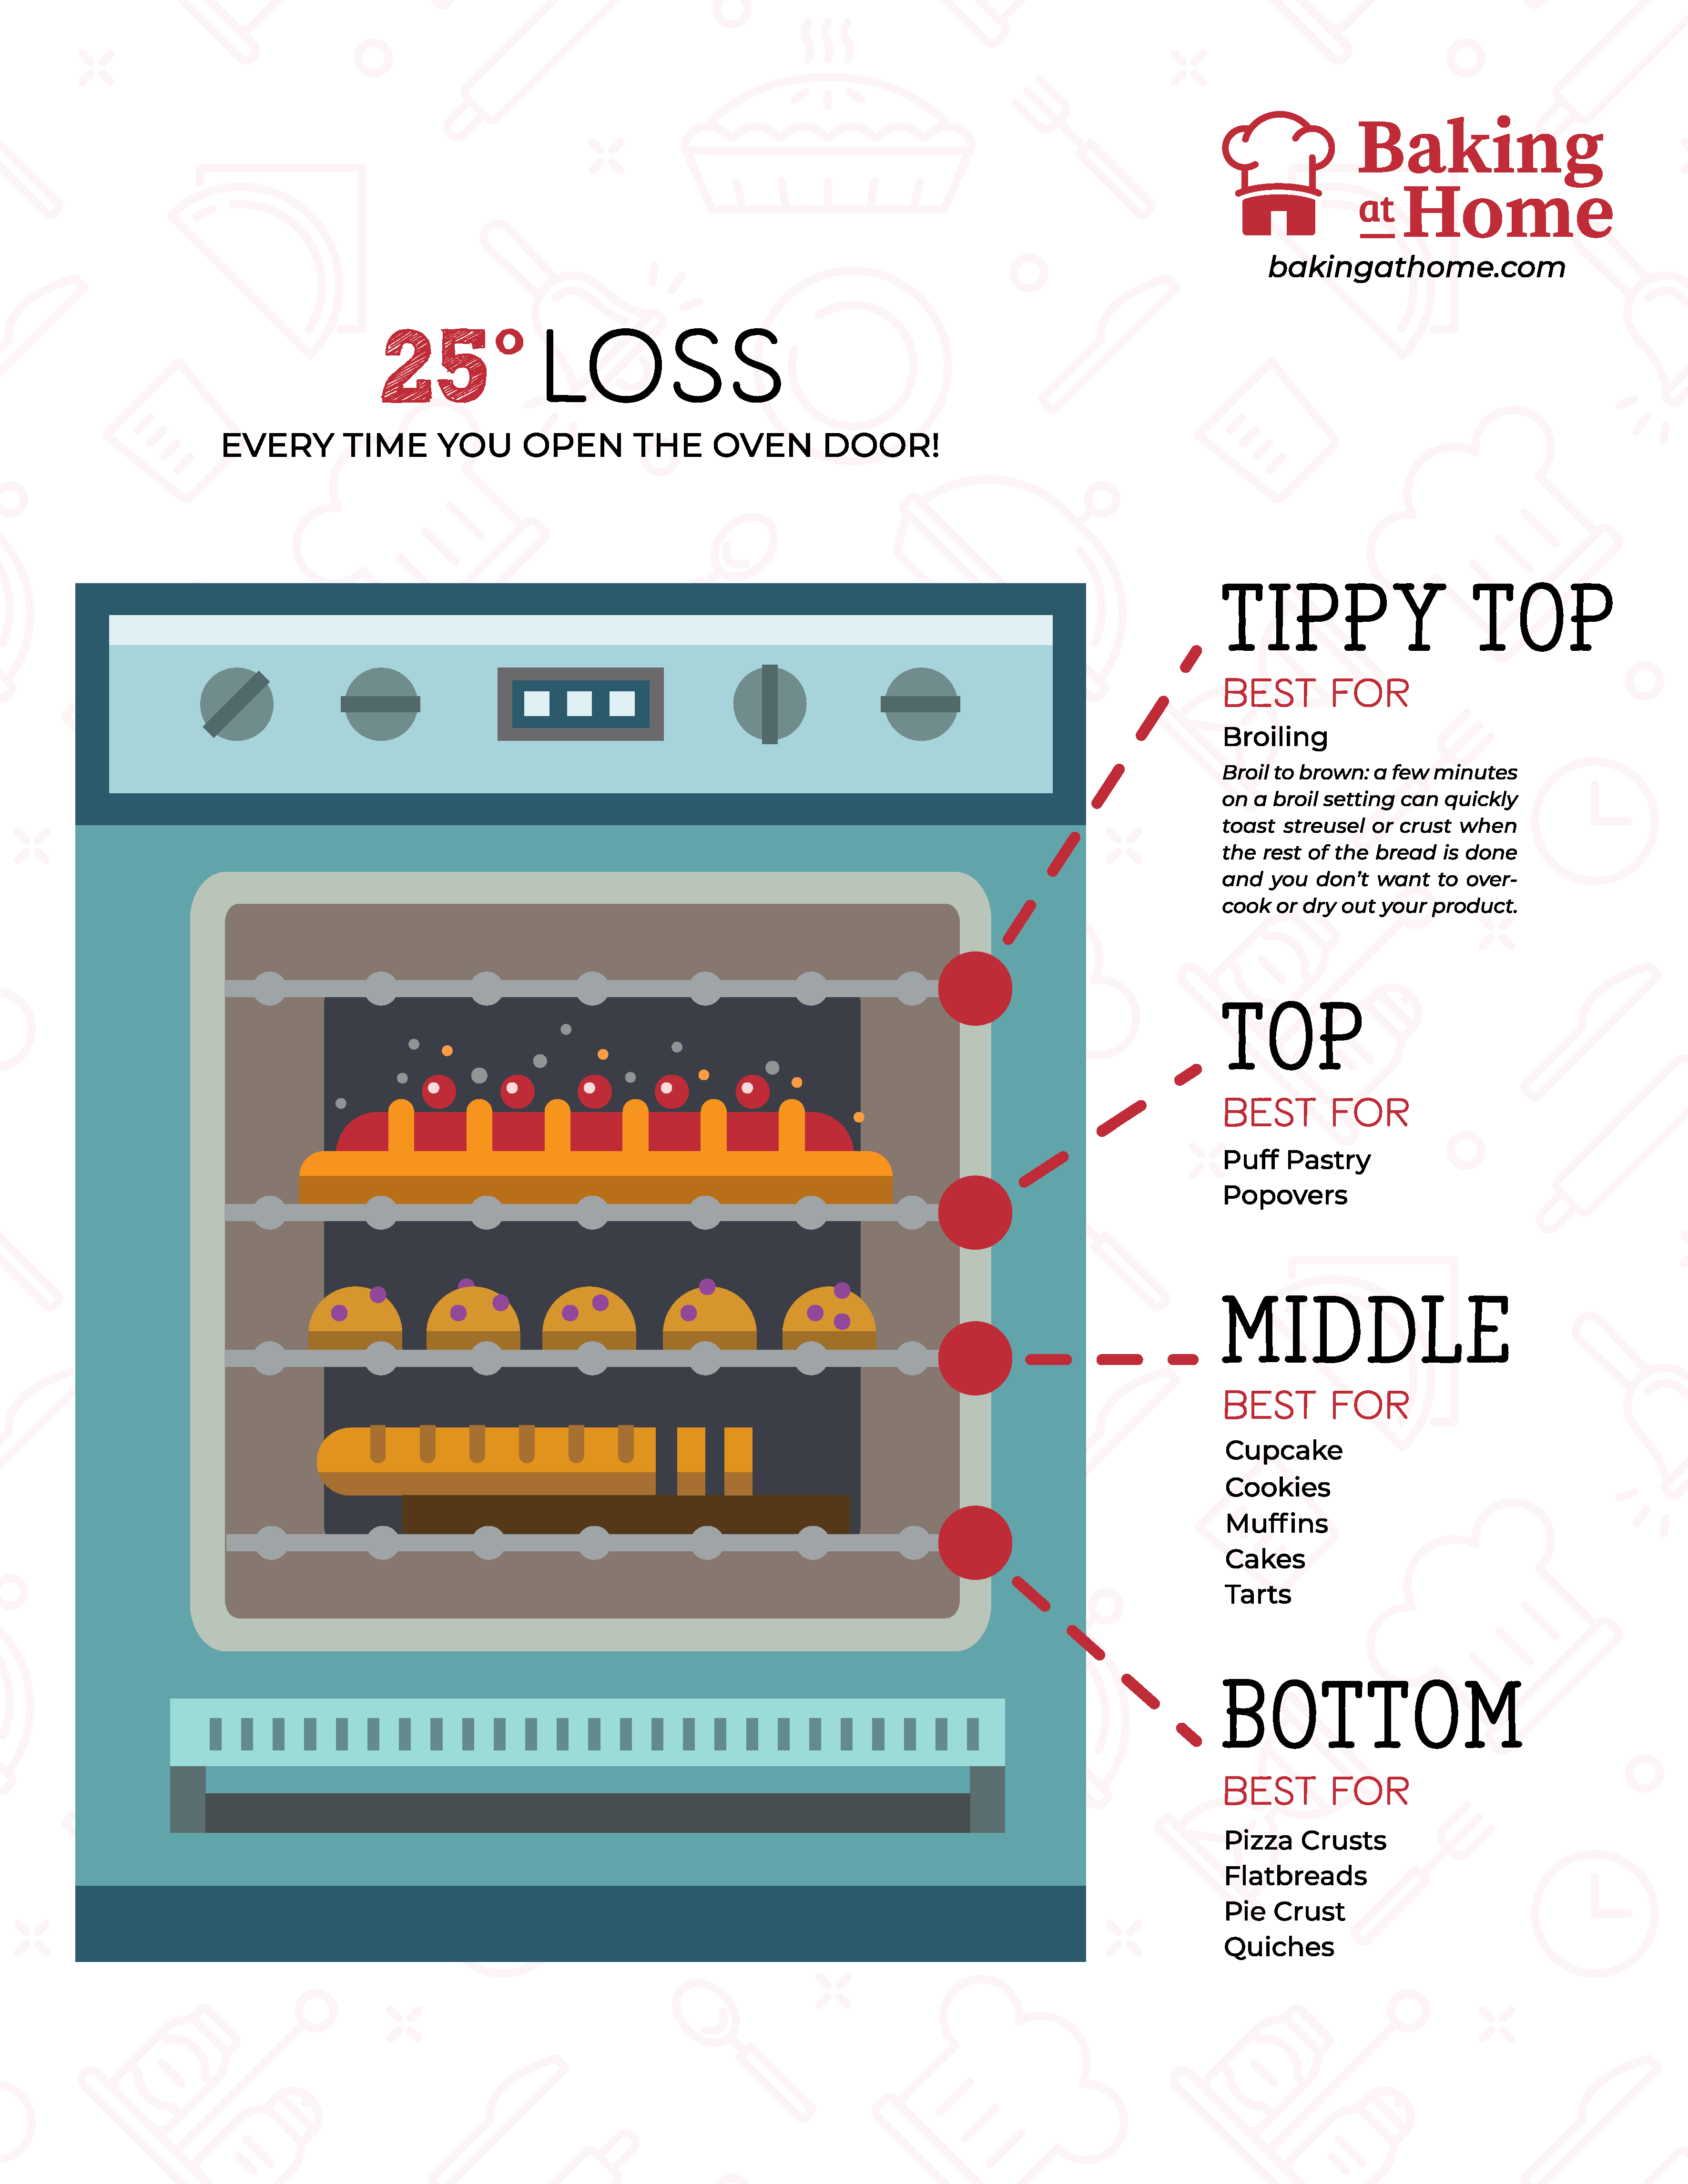 Baking graphics from Baking at Home - our oven temperature guide!